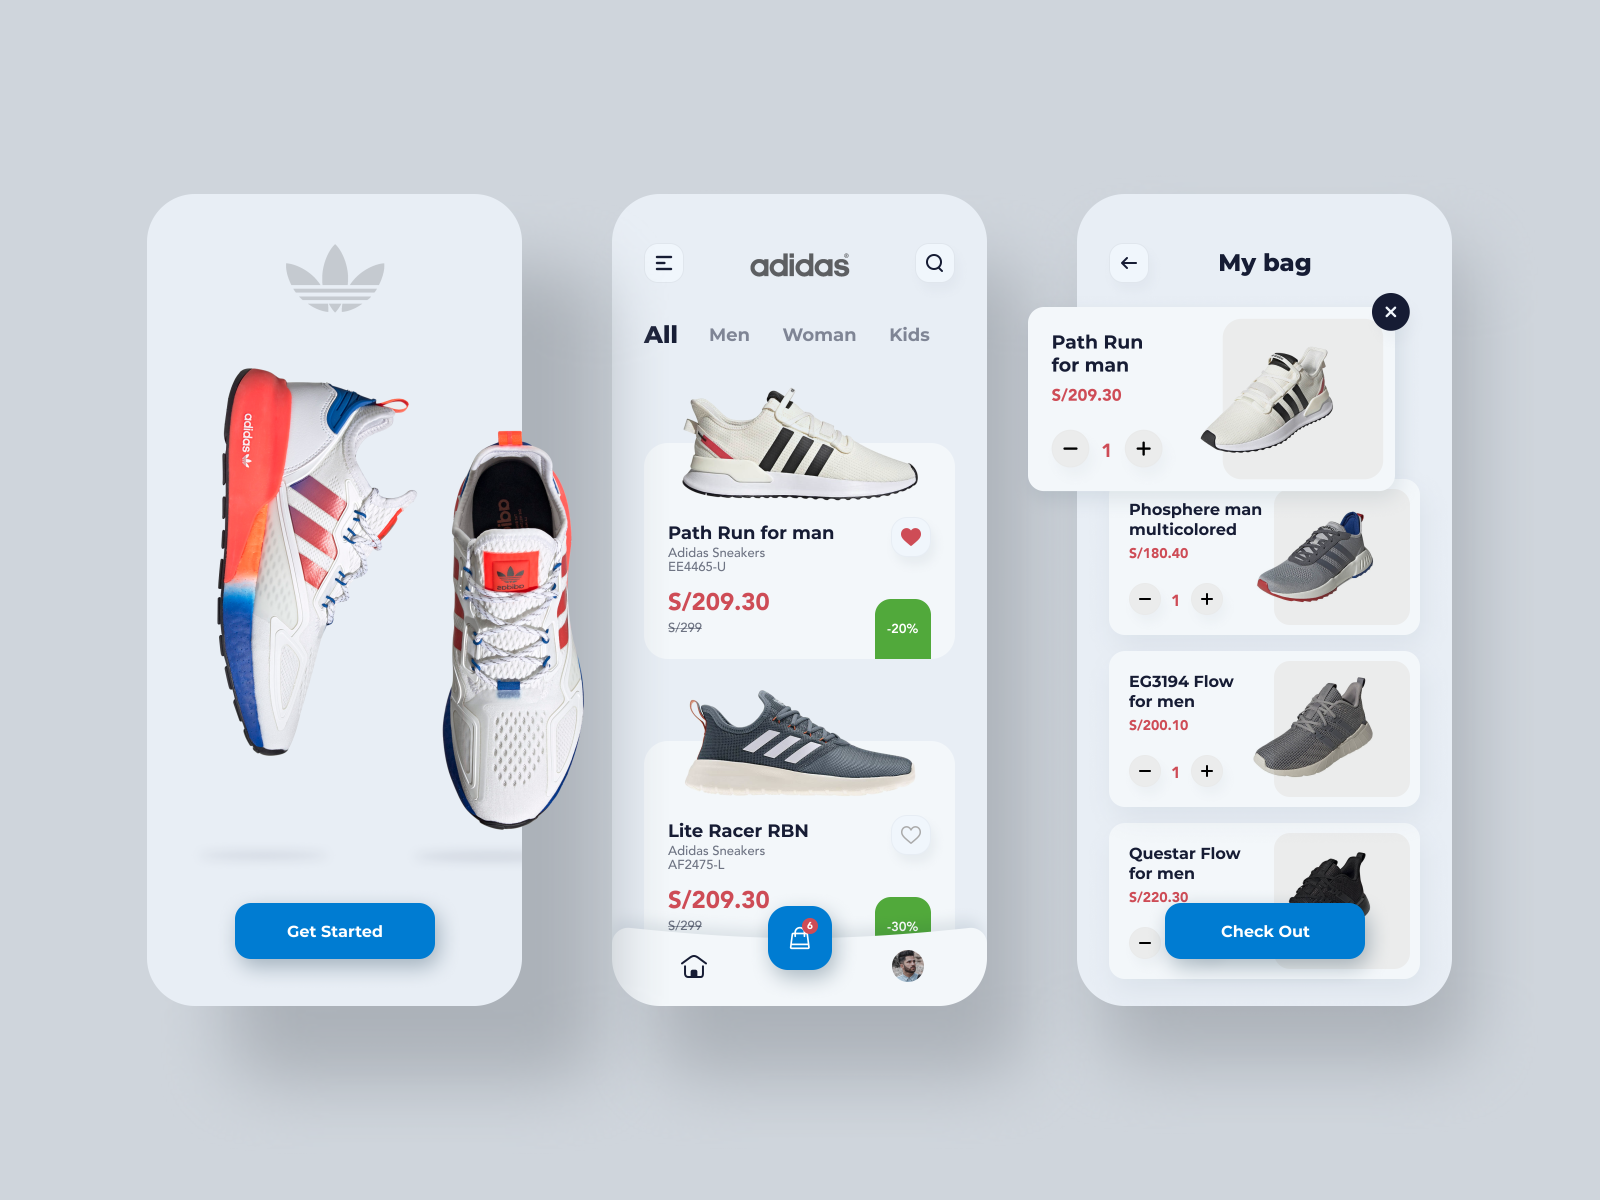 Adidas by Christian Linares on Dribbble